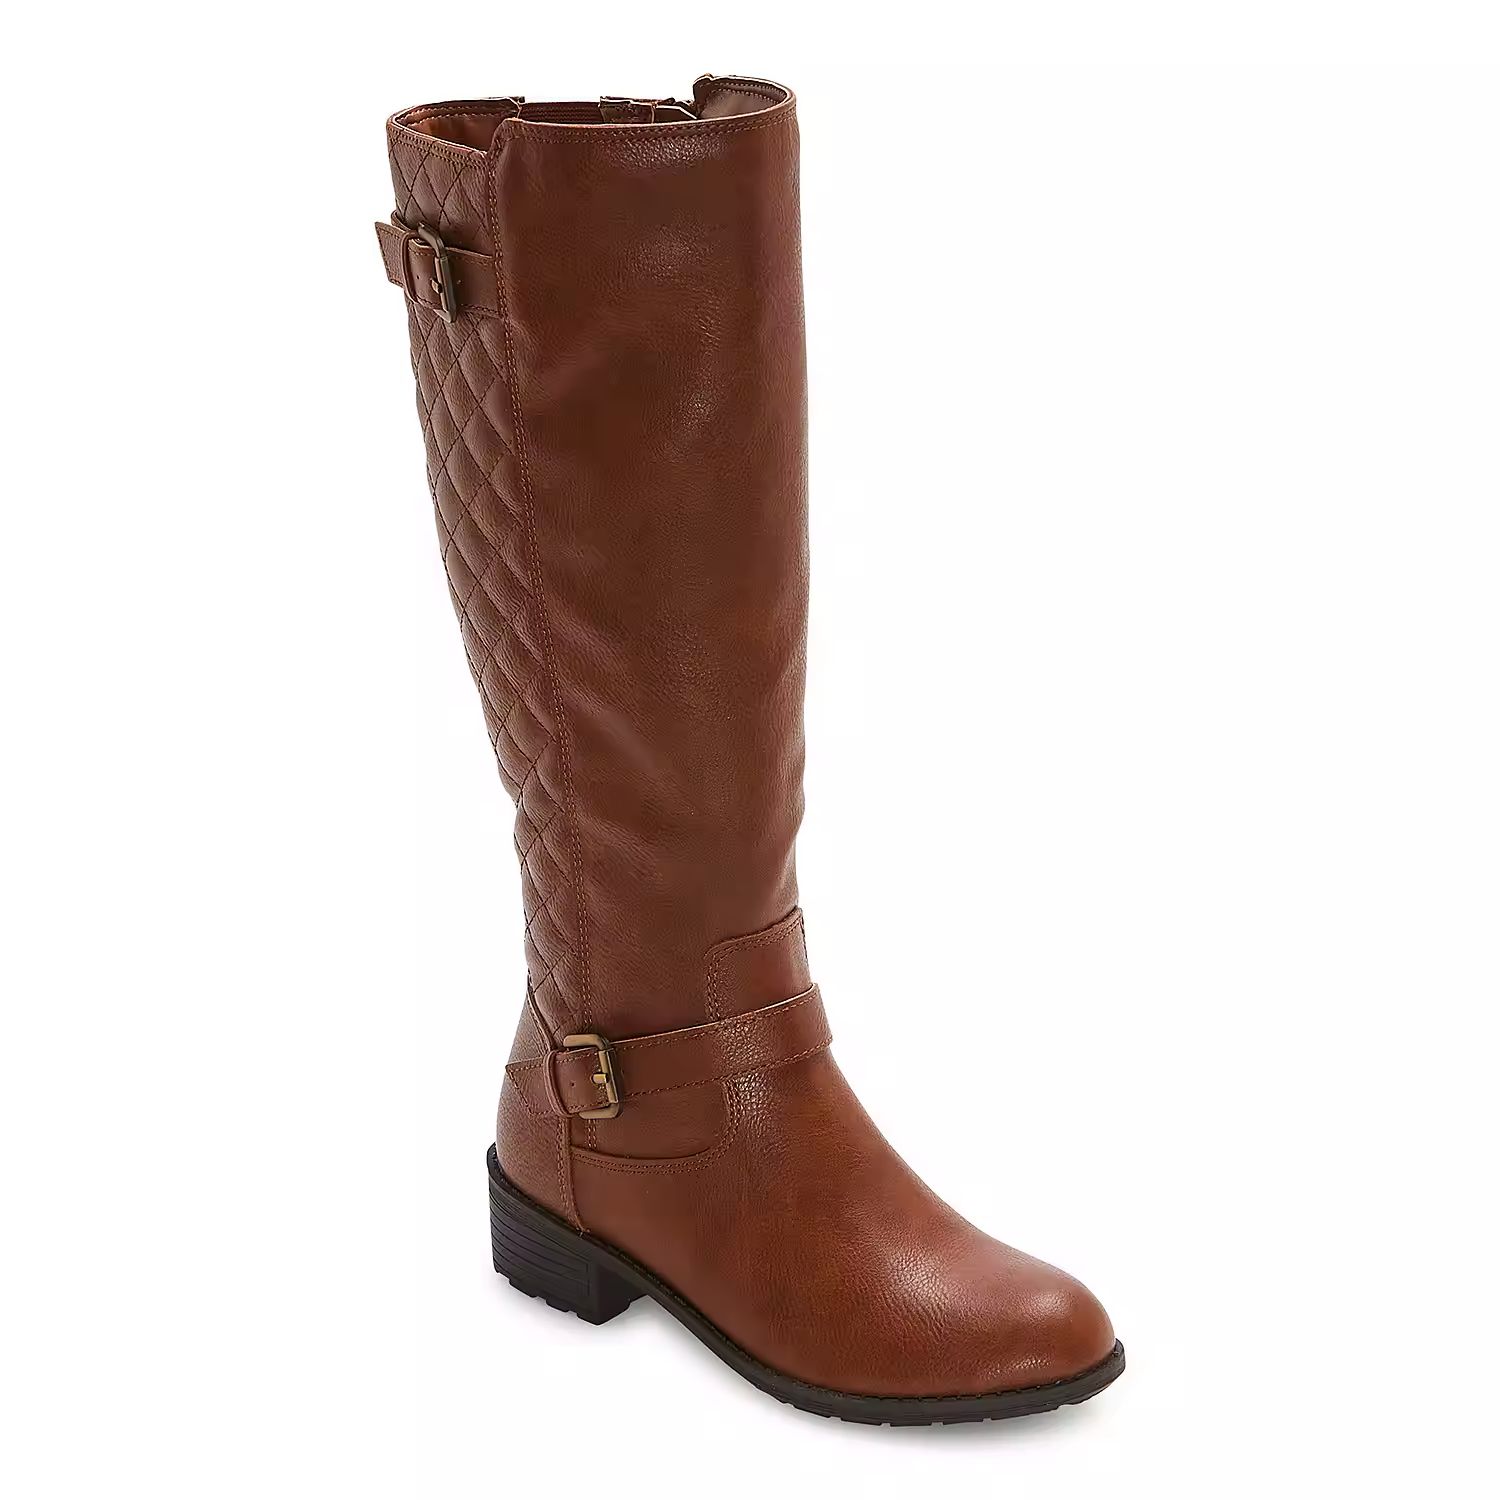 St. John's Bay Womens Darling Stacked Heel Riding Boots | JCPenney